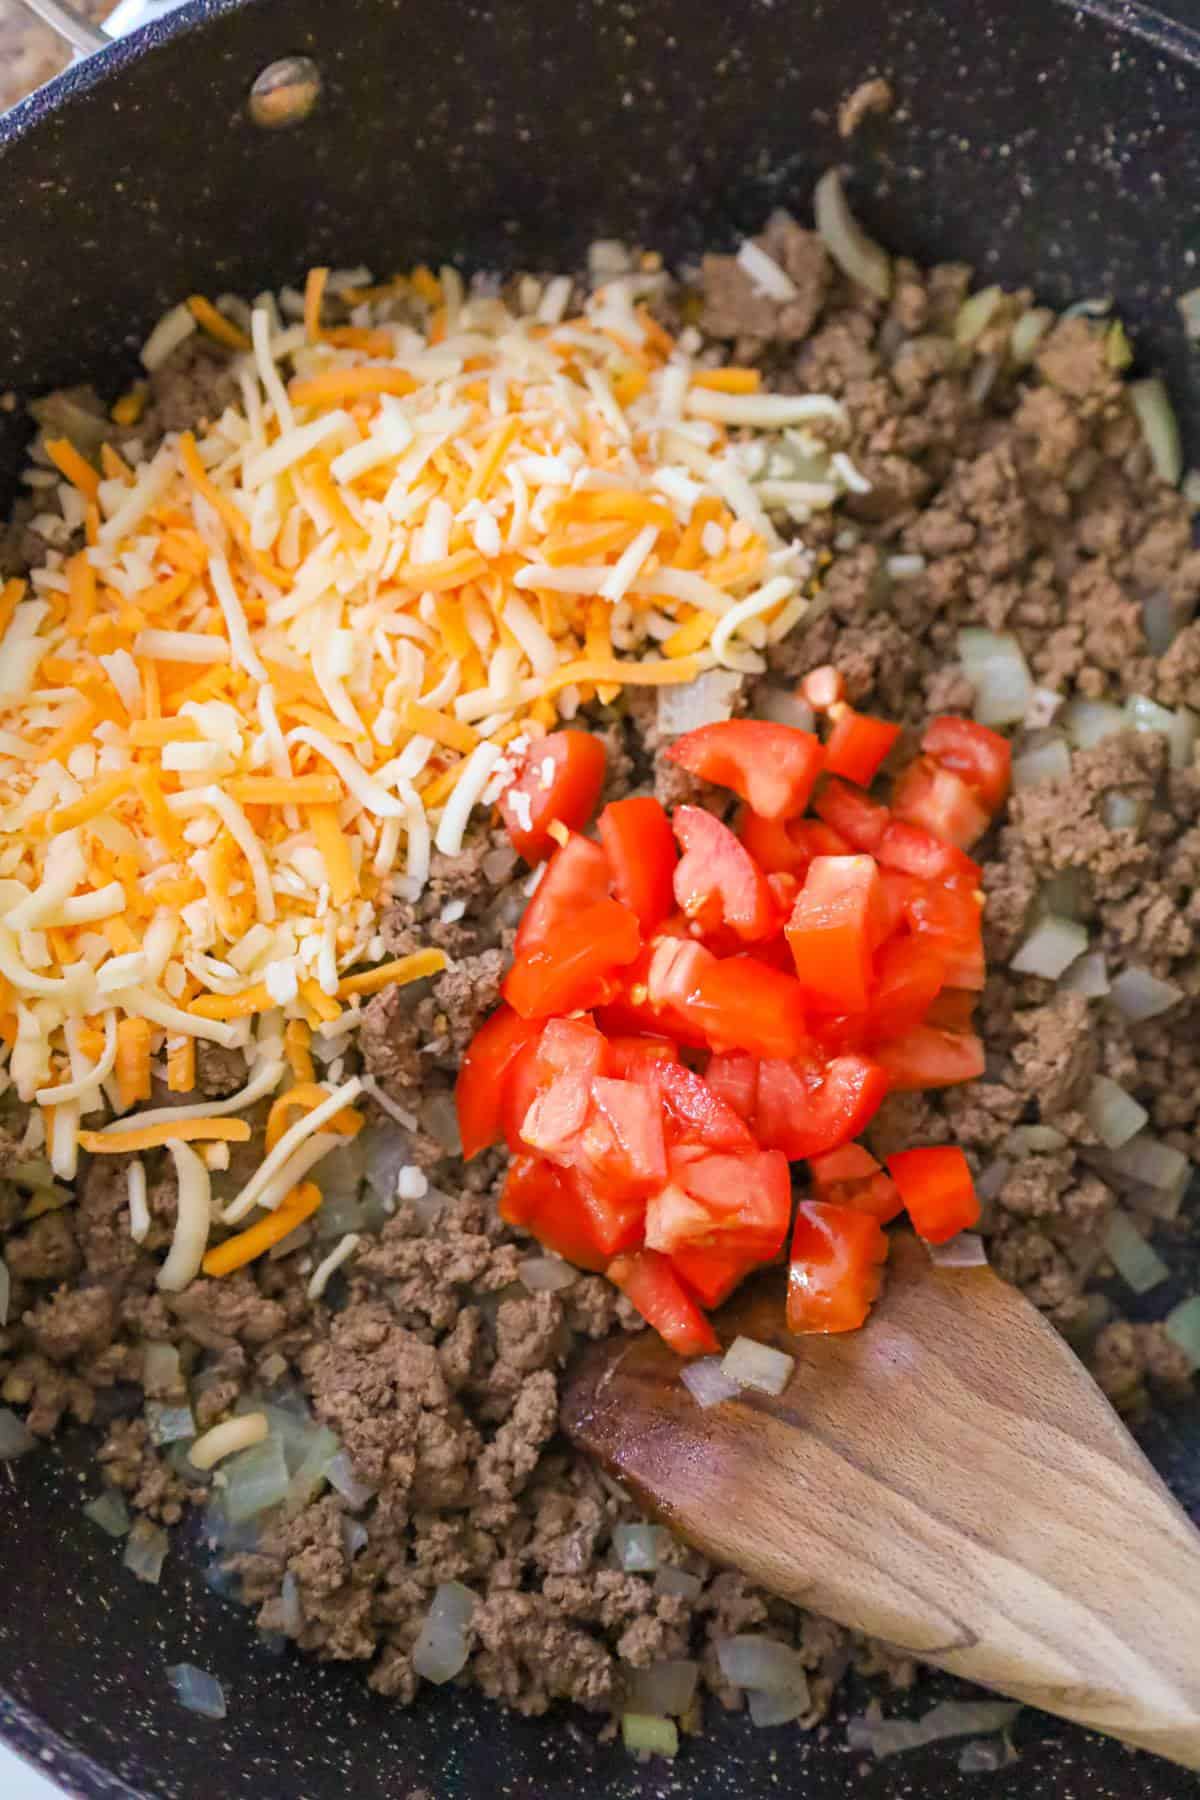 shredded cheddar cheese and diced tomatoes on top of cooked ground beef in a saute pan